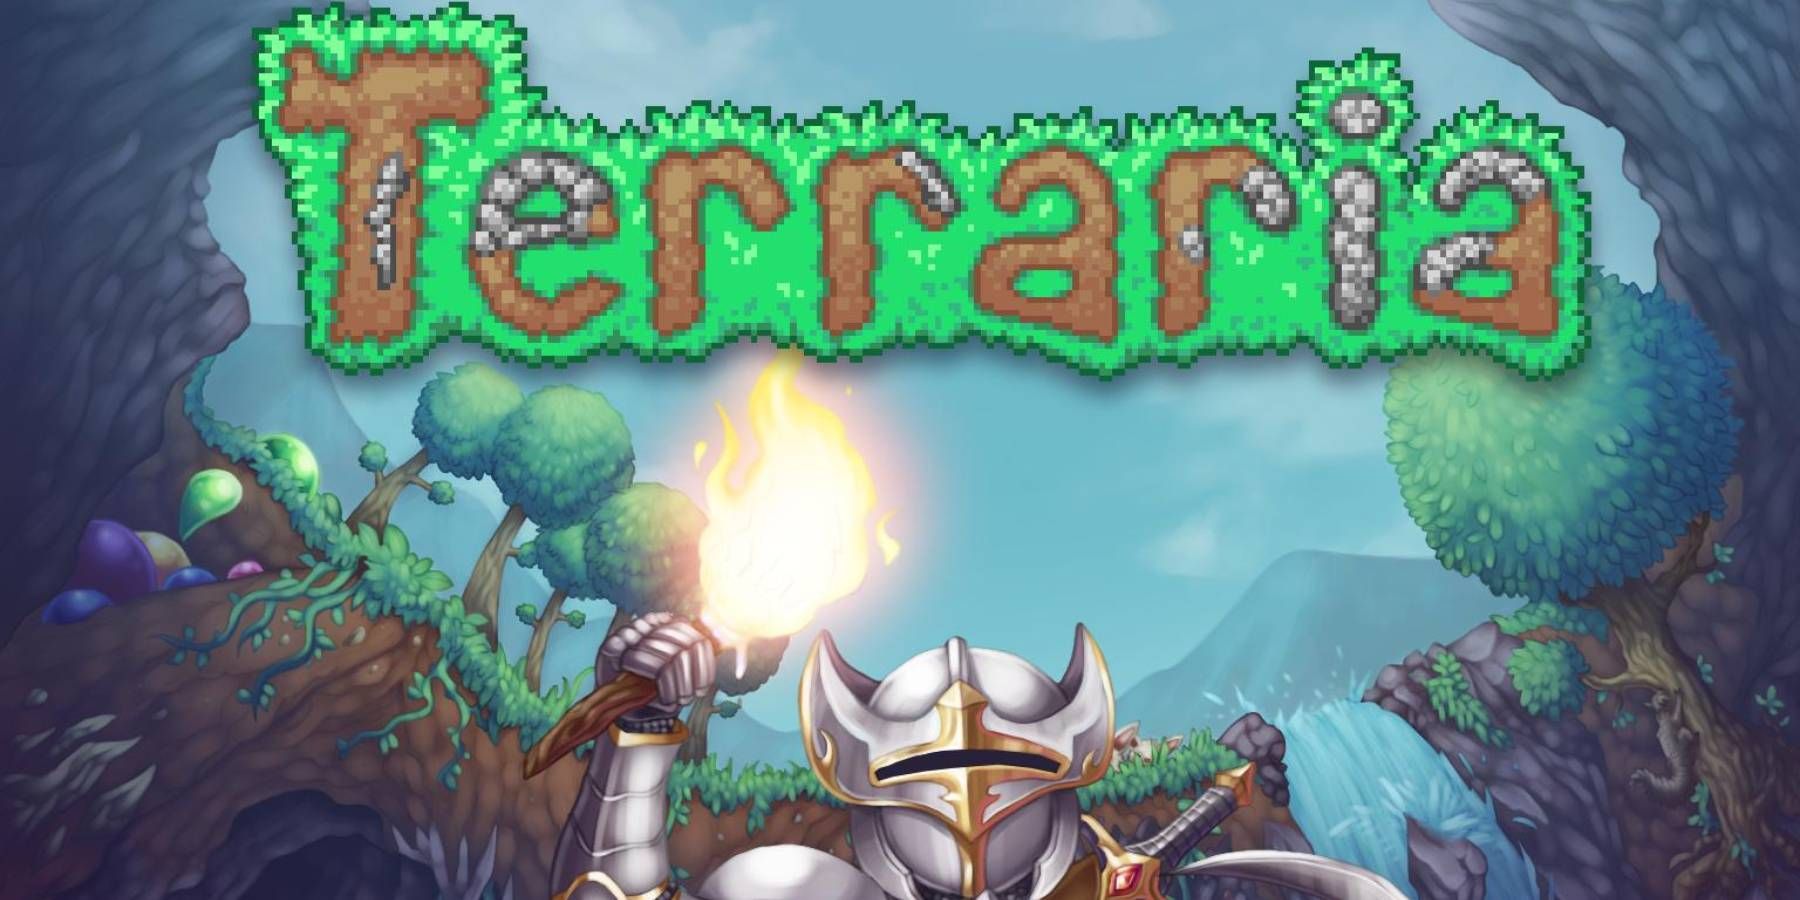 Terraria crossover update adds three new achievements